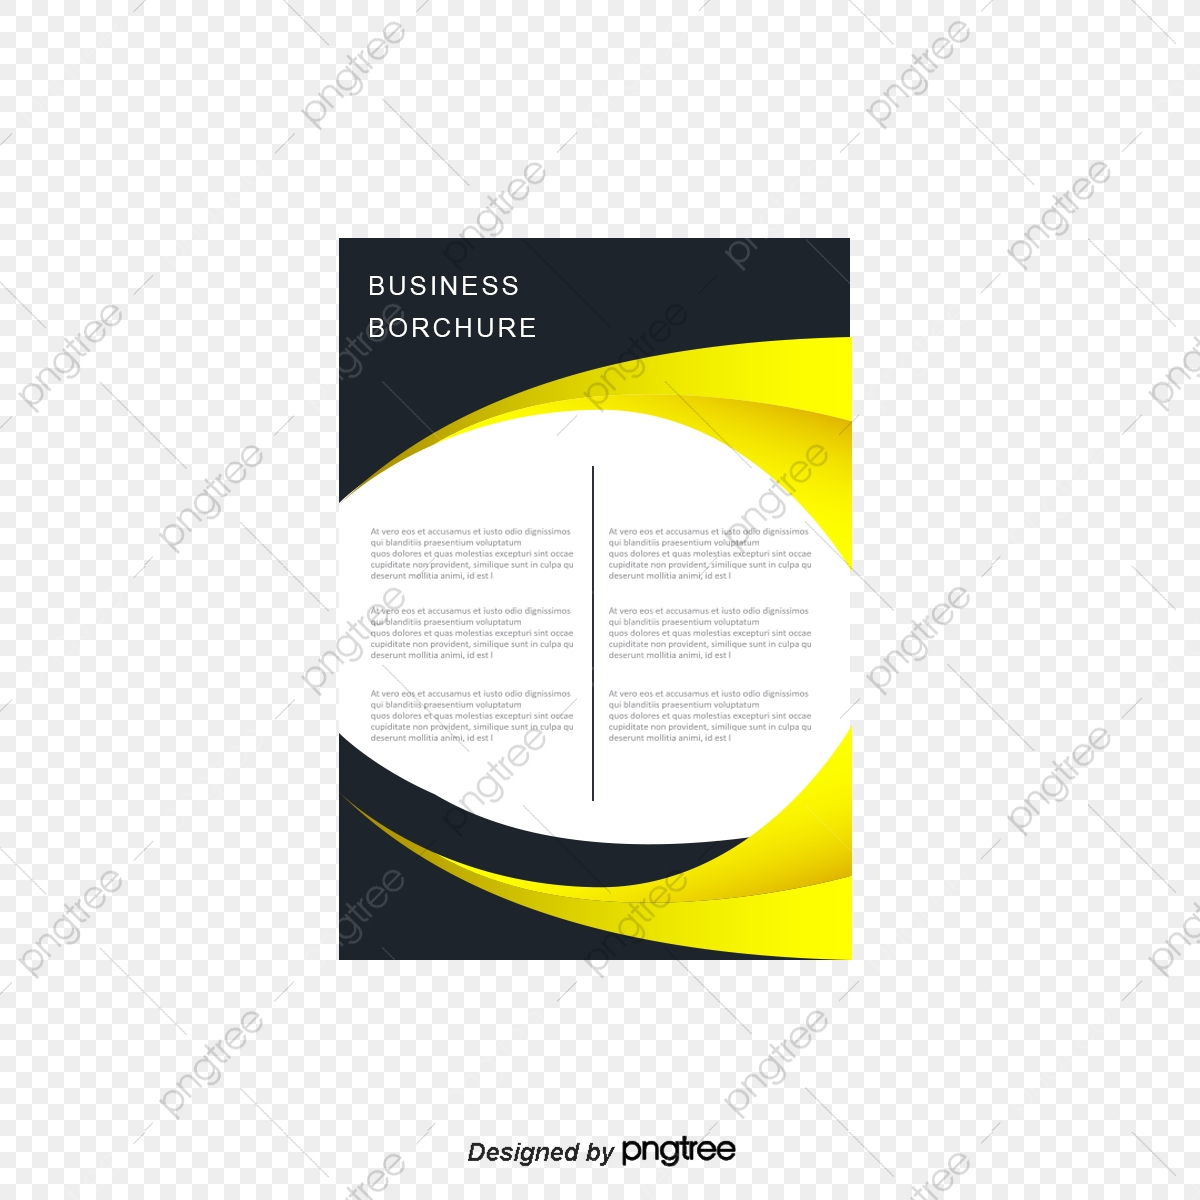 One Page Brochure PNG Transparent Images Free Download  Vector  Intended For Single Page Brochure Templates Psd